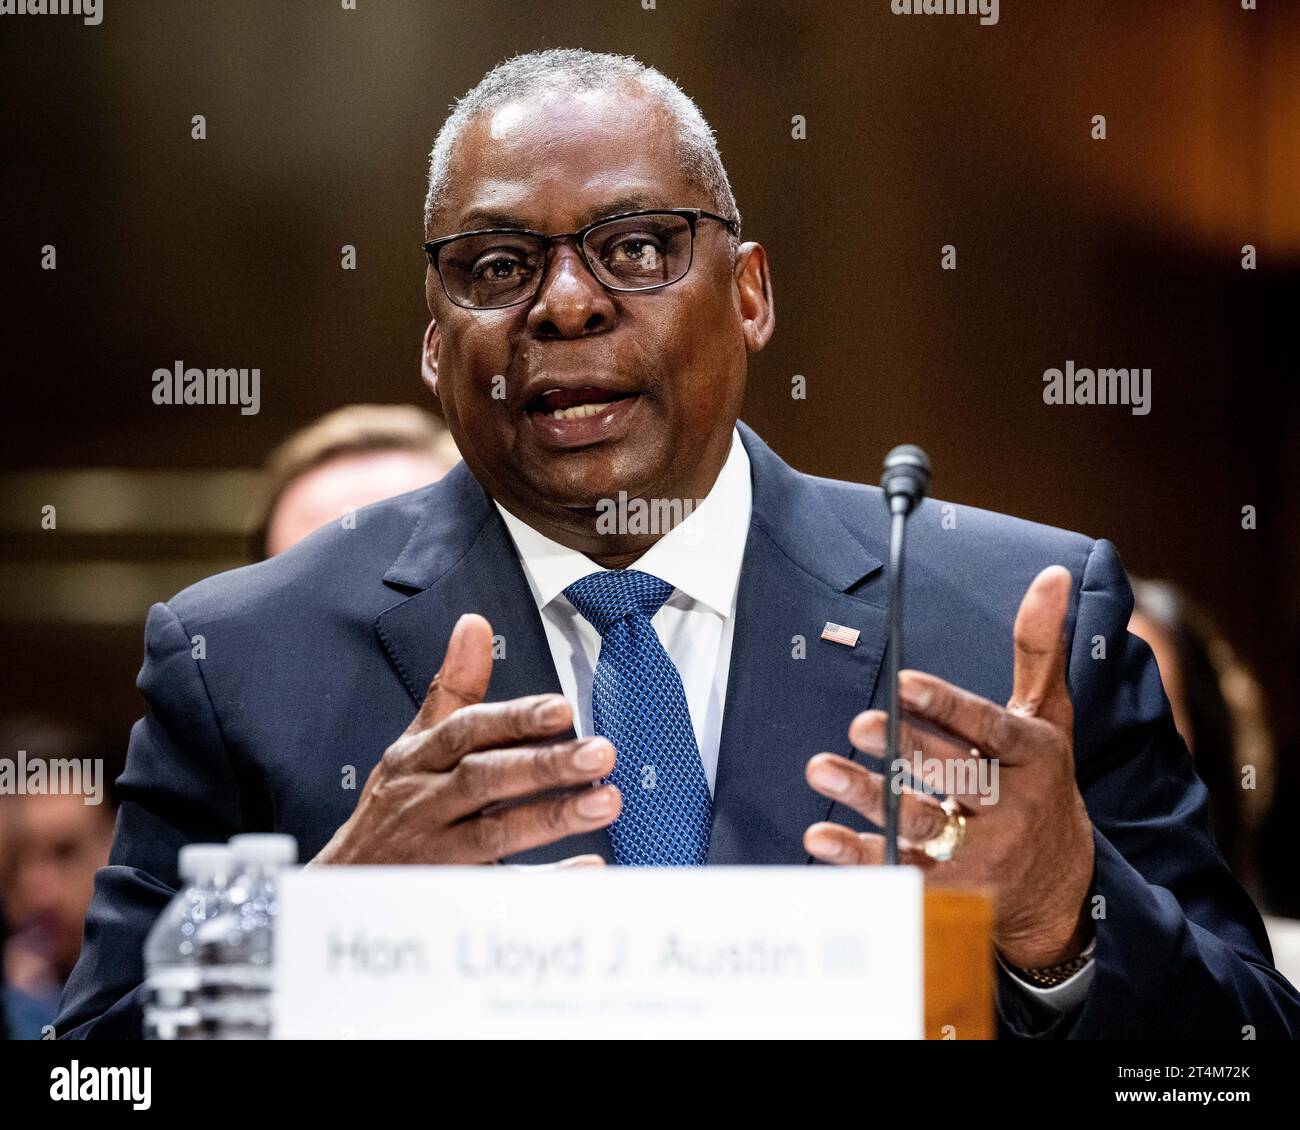 Washington, United States. 31st Oct, 2023. U.S. Secretary of Defense Lloyd Austin speaking at a hearing of the Senate Appropriations Committee at the U.S. Capitol. (Photo by Michael Brochstein/Sipa USA) Credit: Sipa USA/Alamy Live News Stock Photo